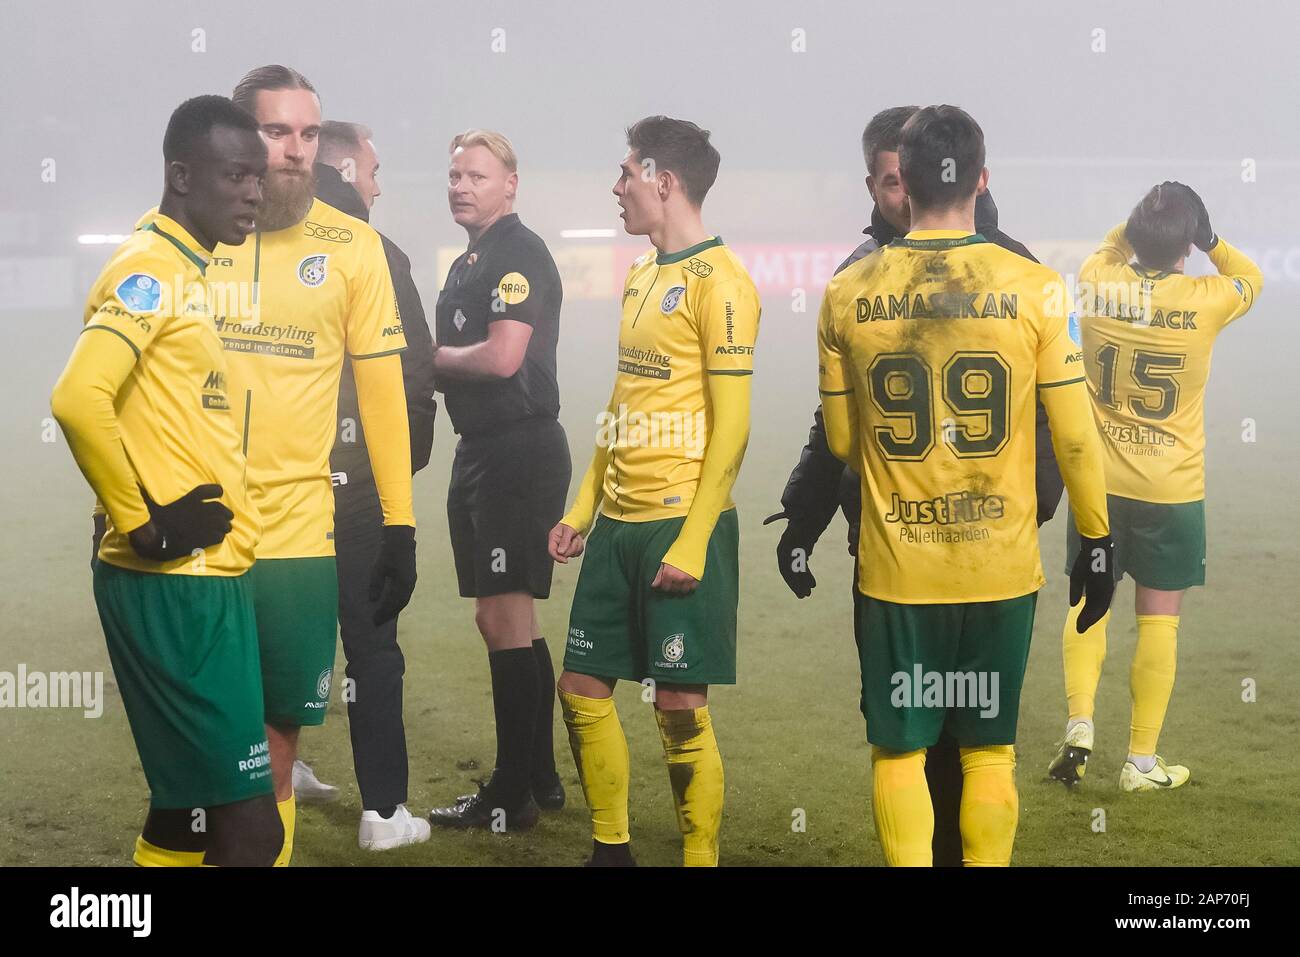 kandidaat dubbel erotisch SITTARD, Fortuna Sittard - Feyenoord, football, KNVB Beker, National Cup  game, season 2019-2020, 21-01-2020, Fortuna Sittard Stadium, referee Kevin  Blom has temporarely suspended the game due to heavy fog, Fortuna players  are